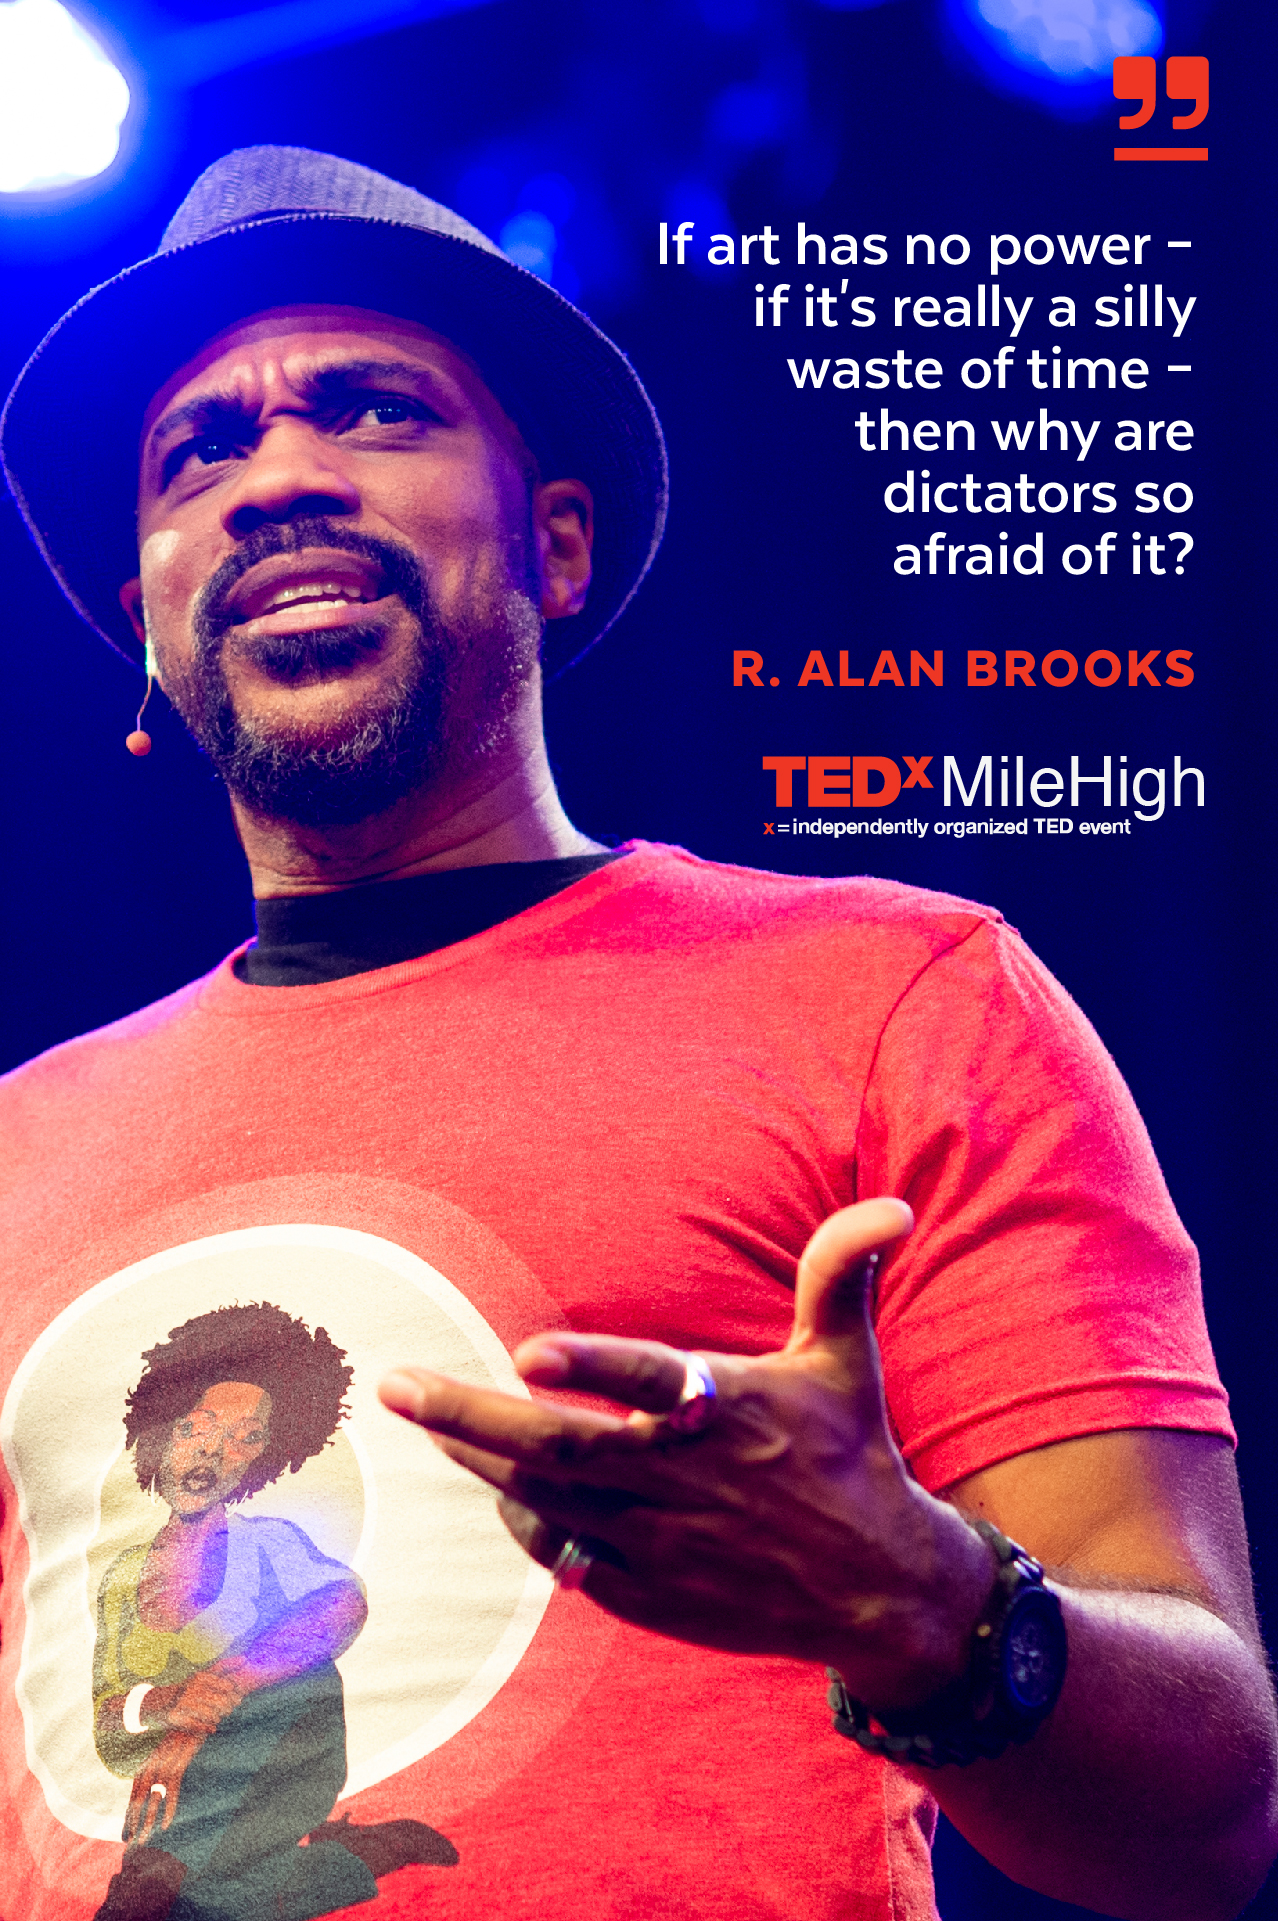 photo of R. Alan Brooks at a Ted talk with the quote " If art has no power - if it's really a silly waste of time - then why are dictators so afraid of it? 